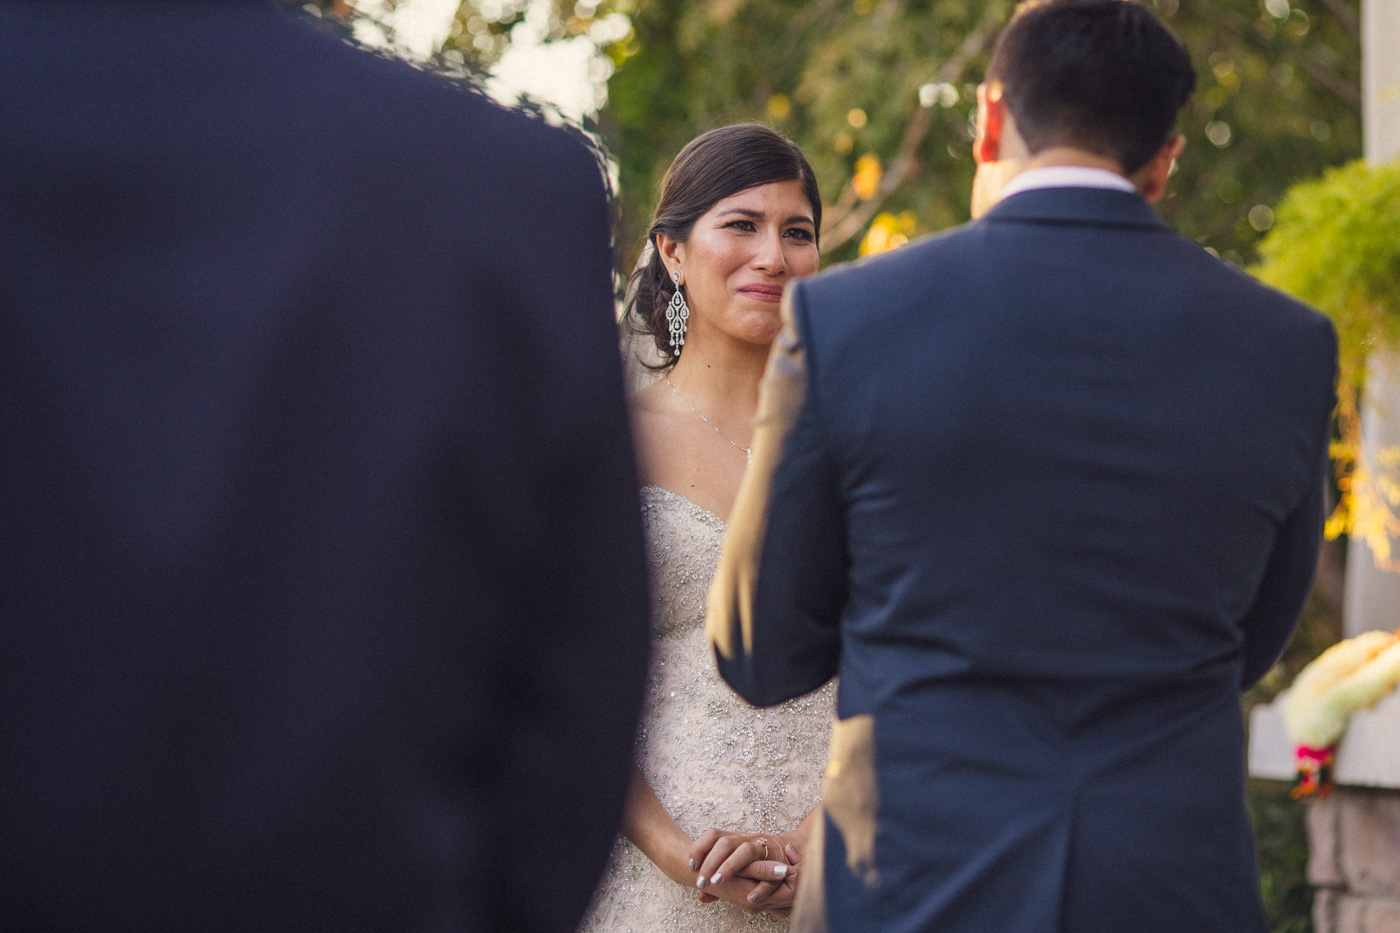 bride-getting-emotional-during-ceremony